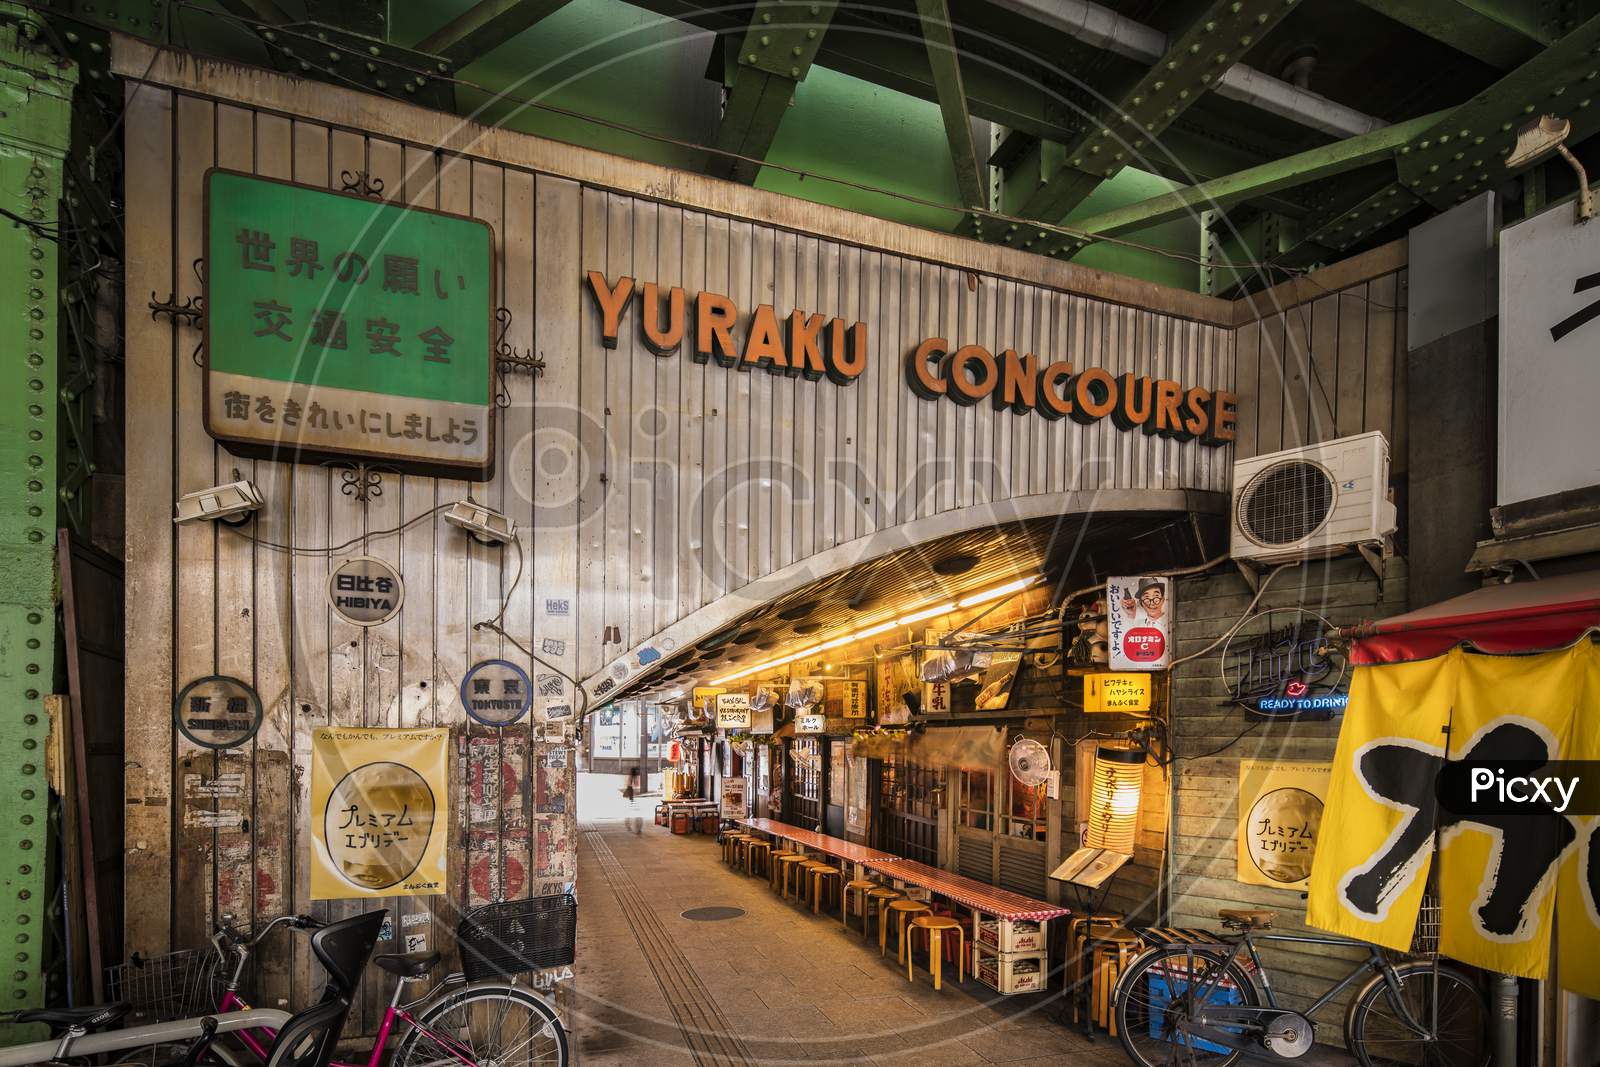 Underpass Yurakucho Concourse Under The Railway Line Of The Station Yurakucho. Japanese Noodle Stalls And Sake Bars Revive The Nostalgic Years Of Showa Air With Old Posters And Placards Glued To The Walls Of The Tunnel.